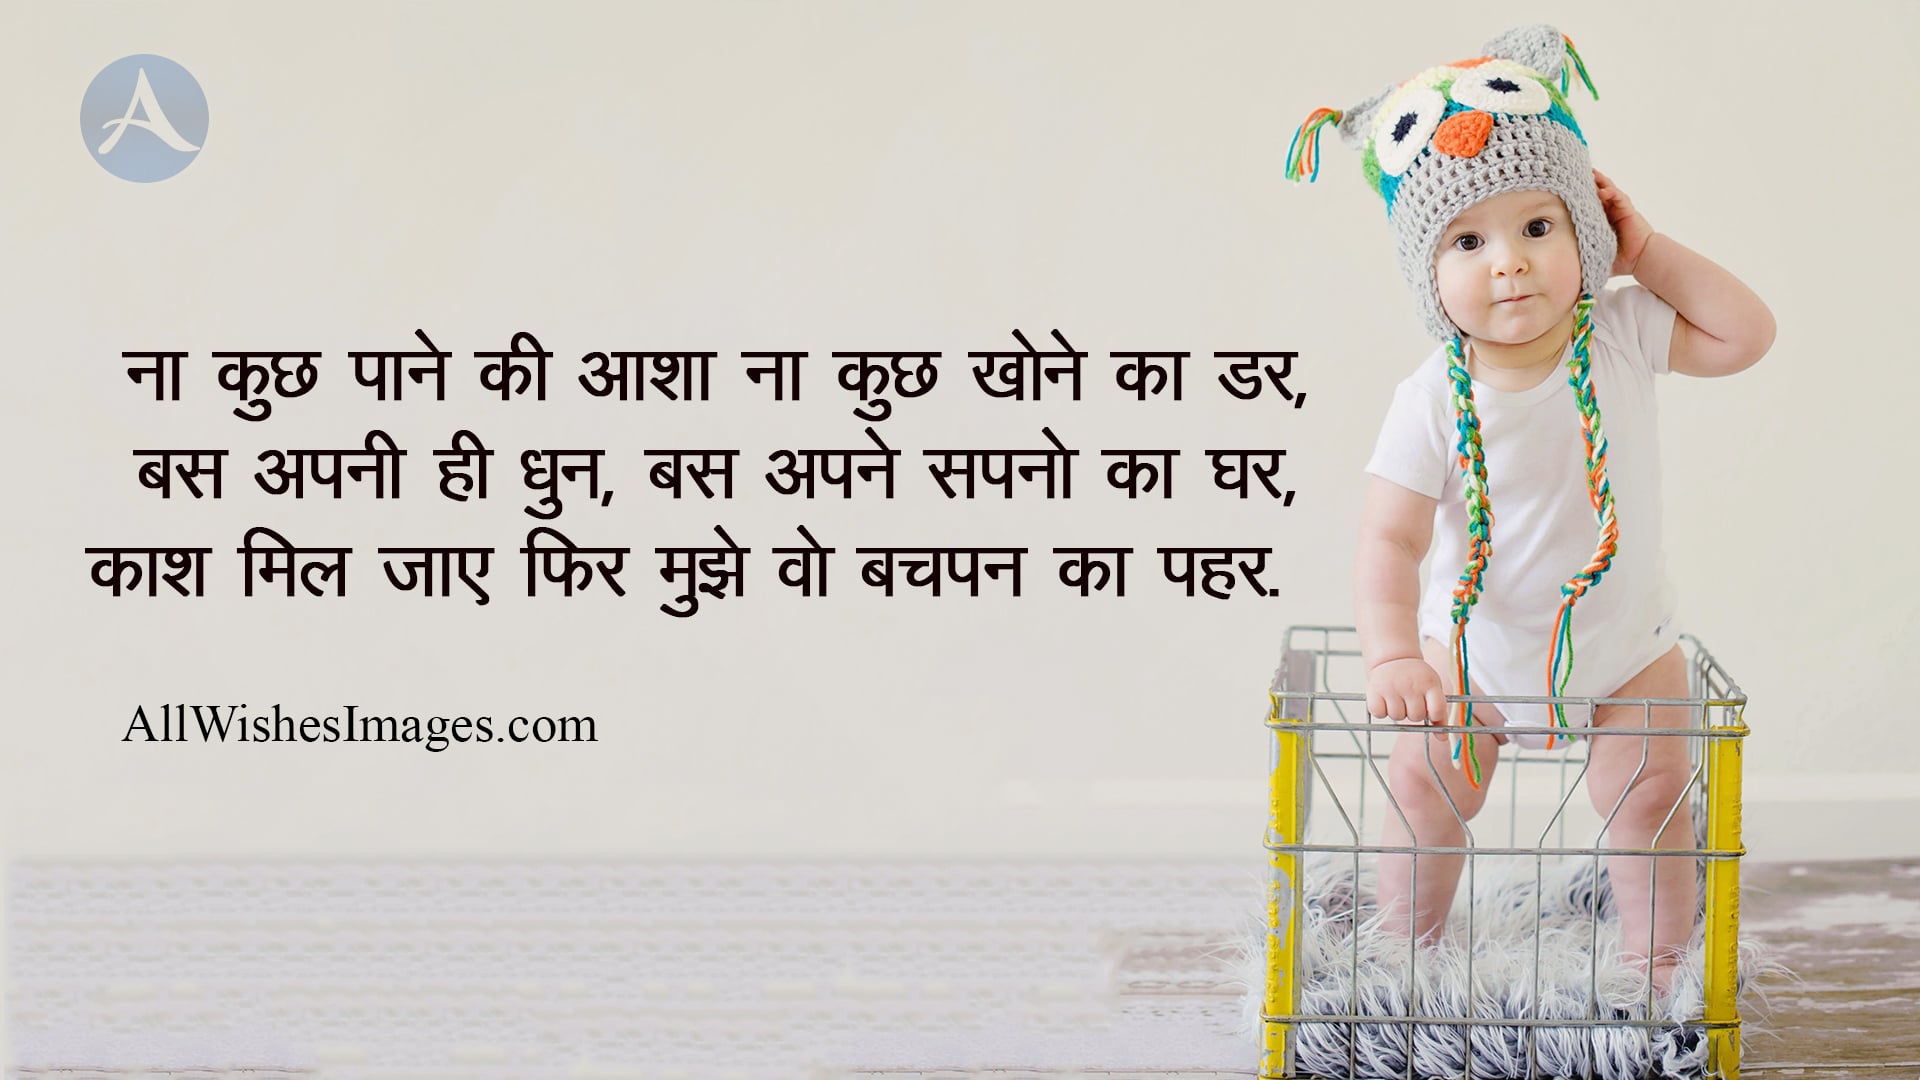 Cute Baby Quote In Hindi - All Wishes Images - Images for WhatsApp